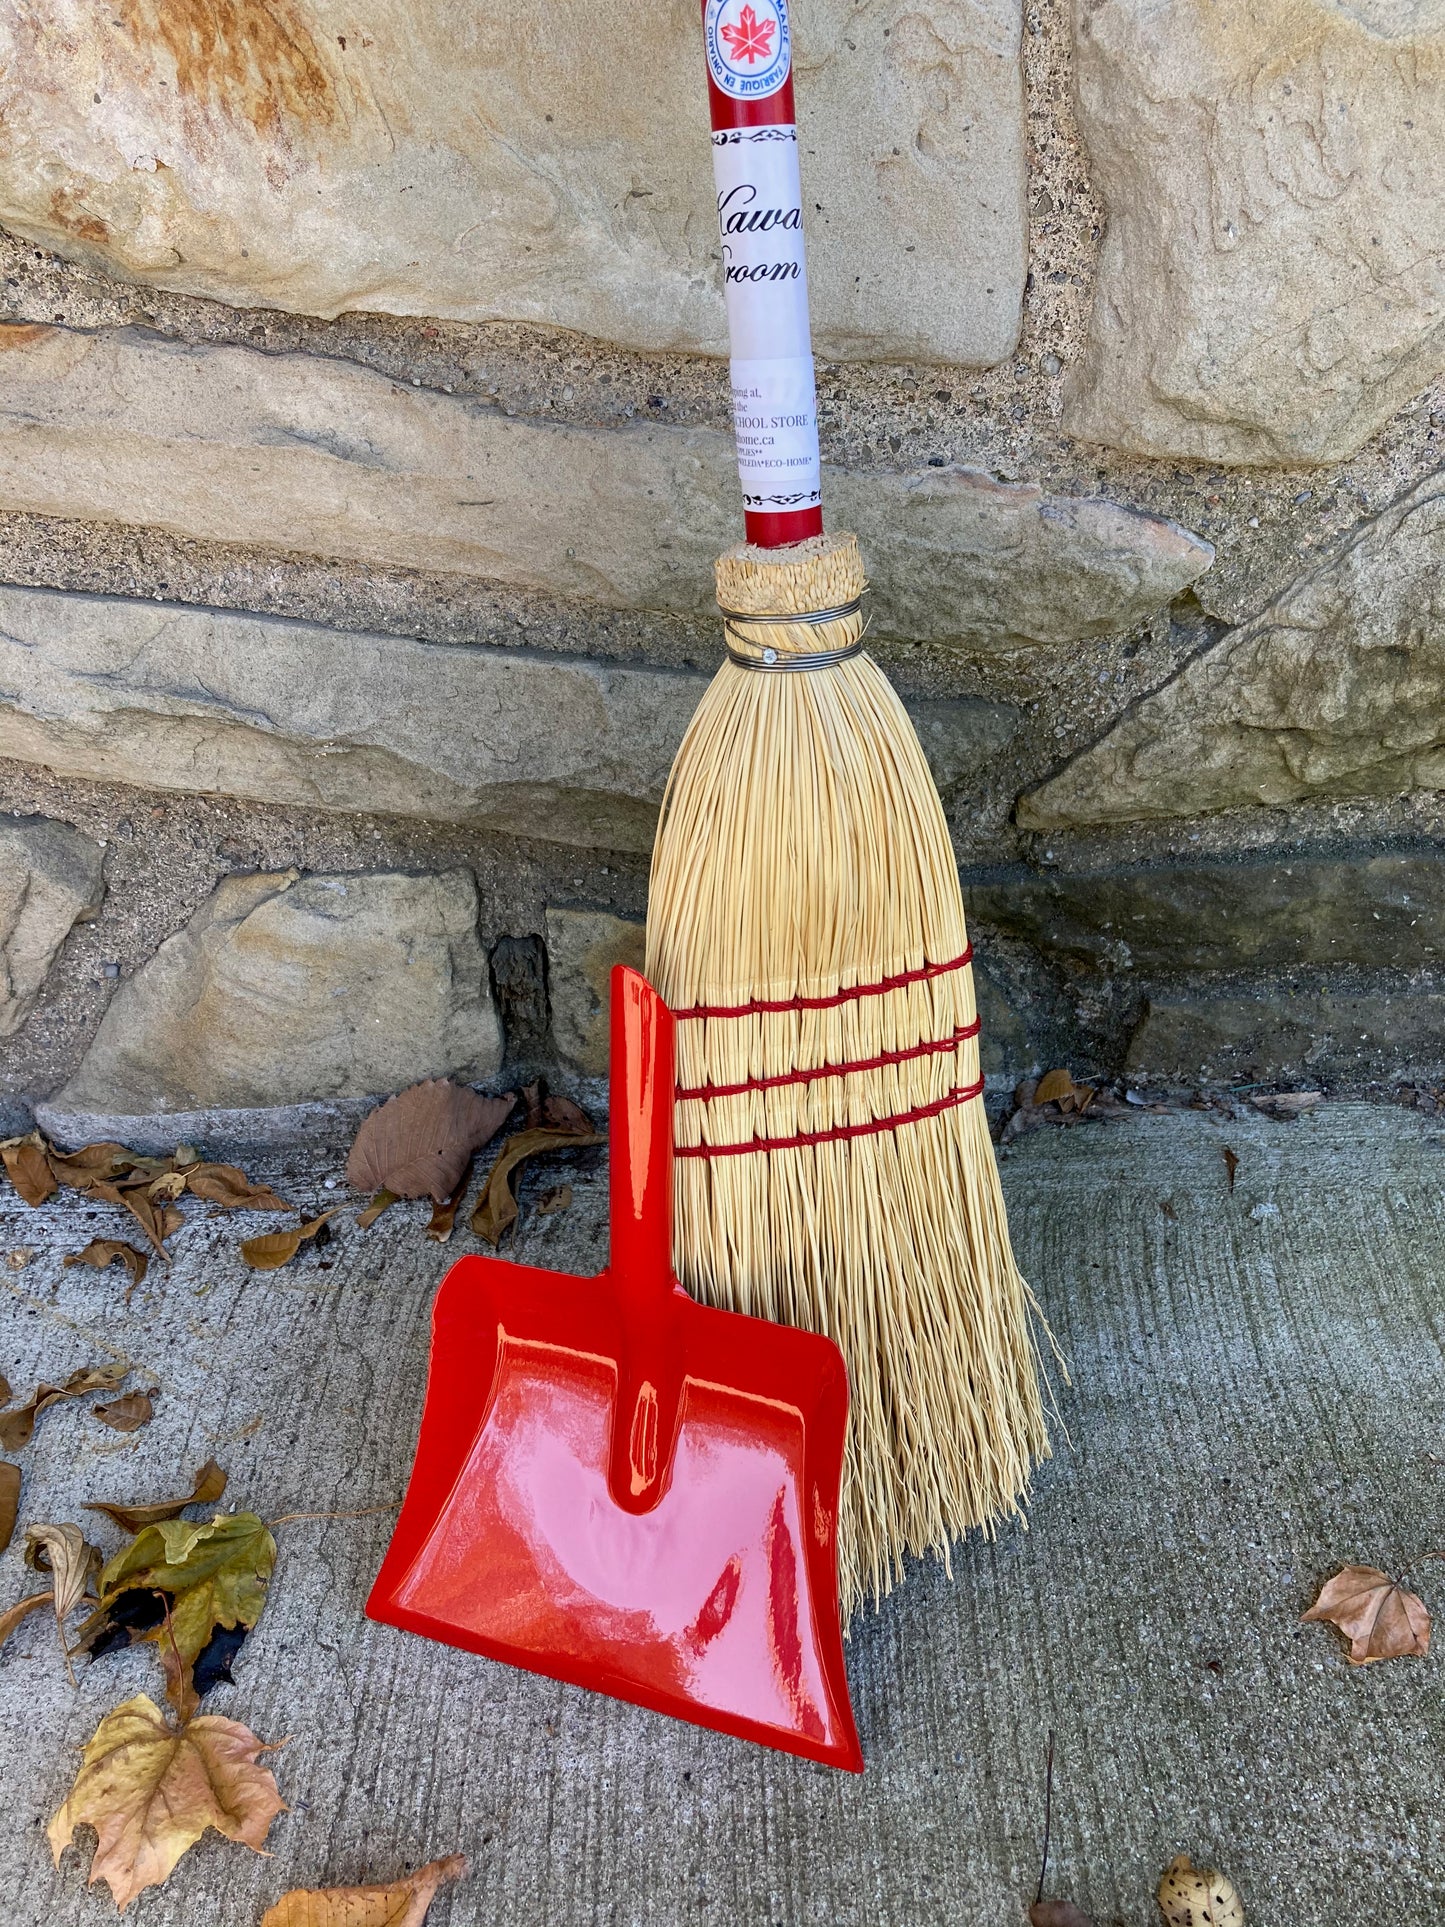 Child's Red WOODEN BROOM and Red Metal DUST PAN